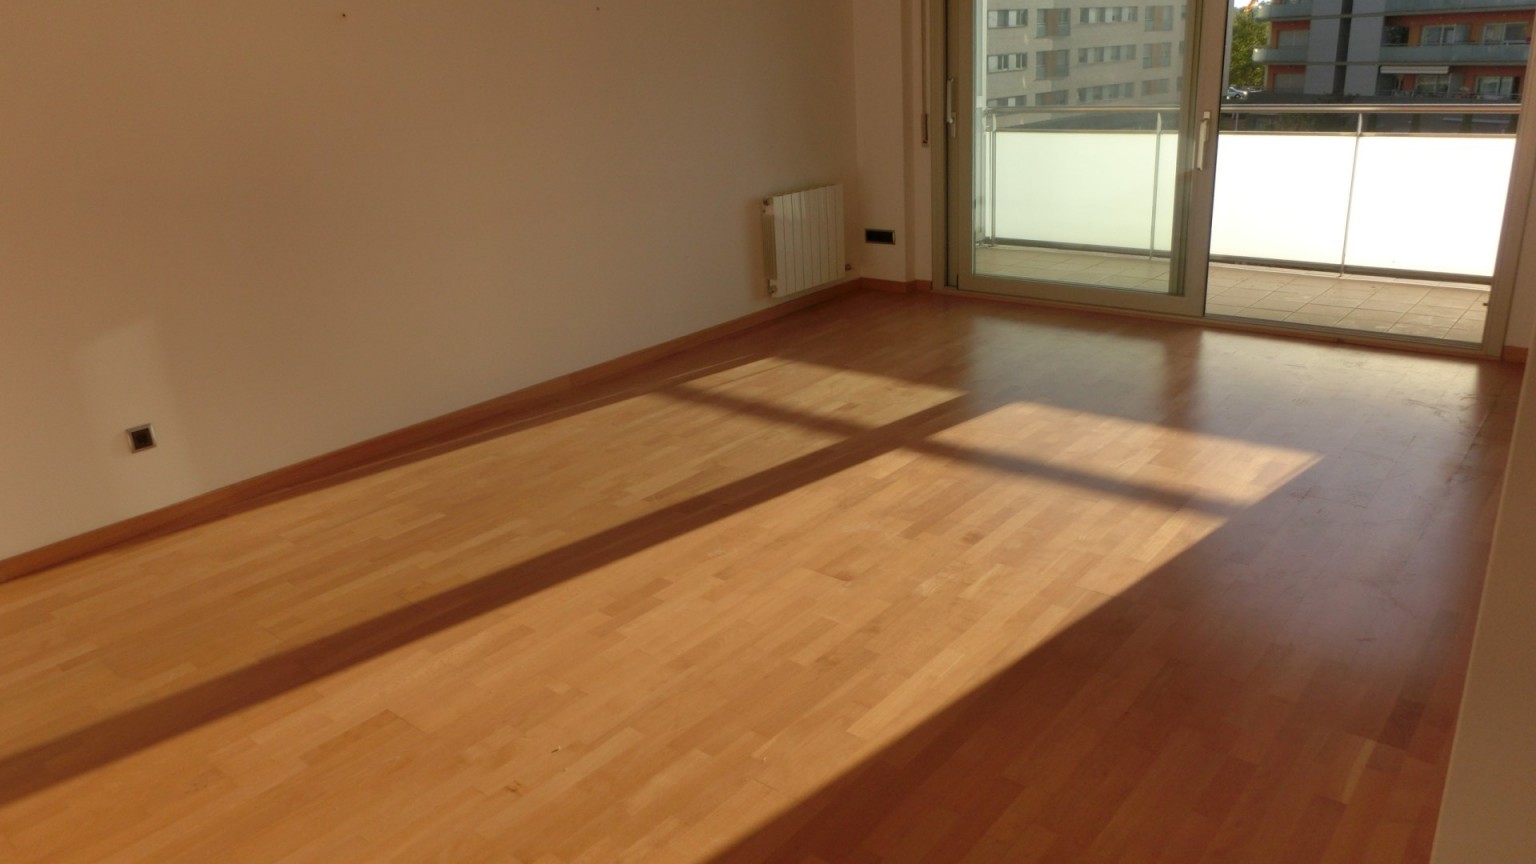 Flat for sale with 3 bedrooms, including parking and storage room.